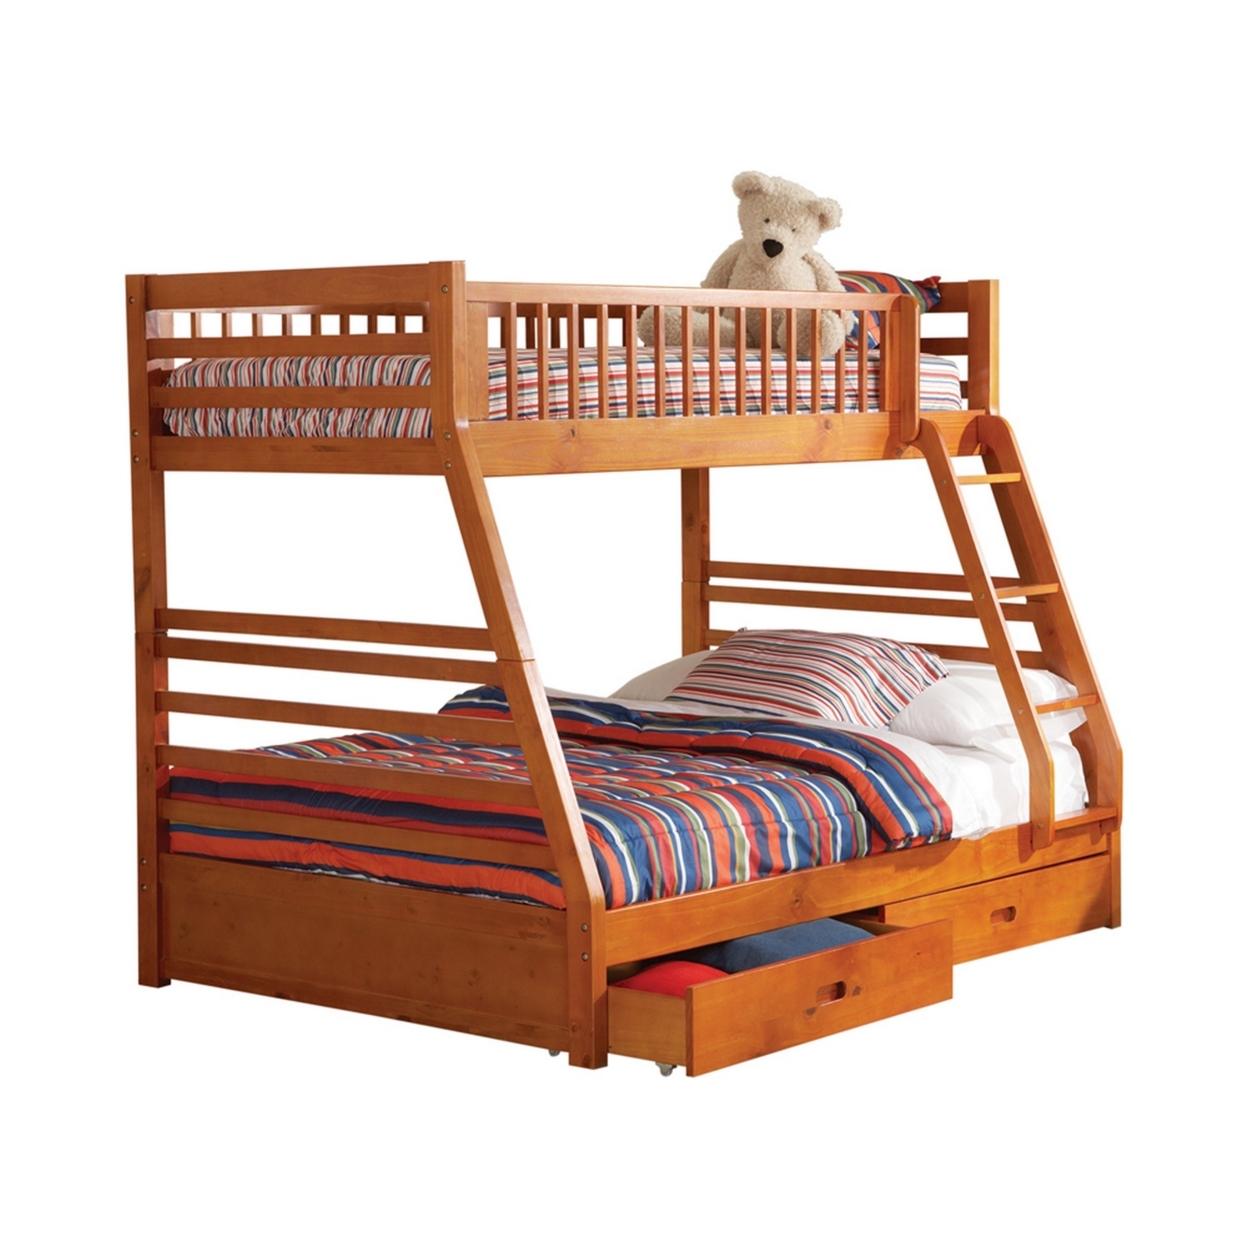 Wooden Twin Over Full Bunk Bed With Wheel Supported Bottom Drawers, Brown- Saltoro Sherpi